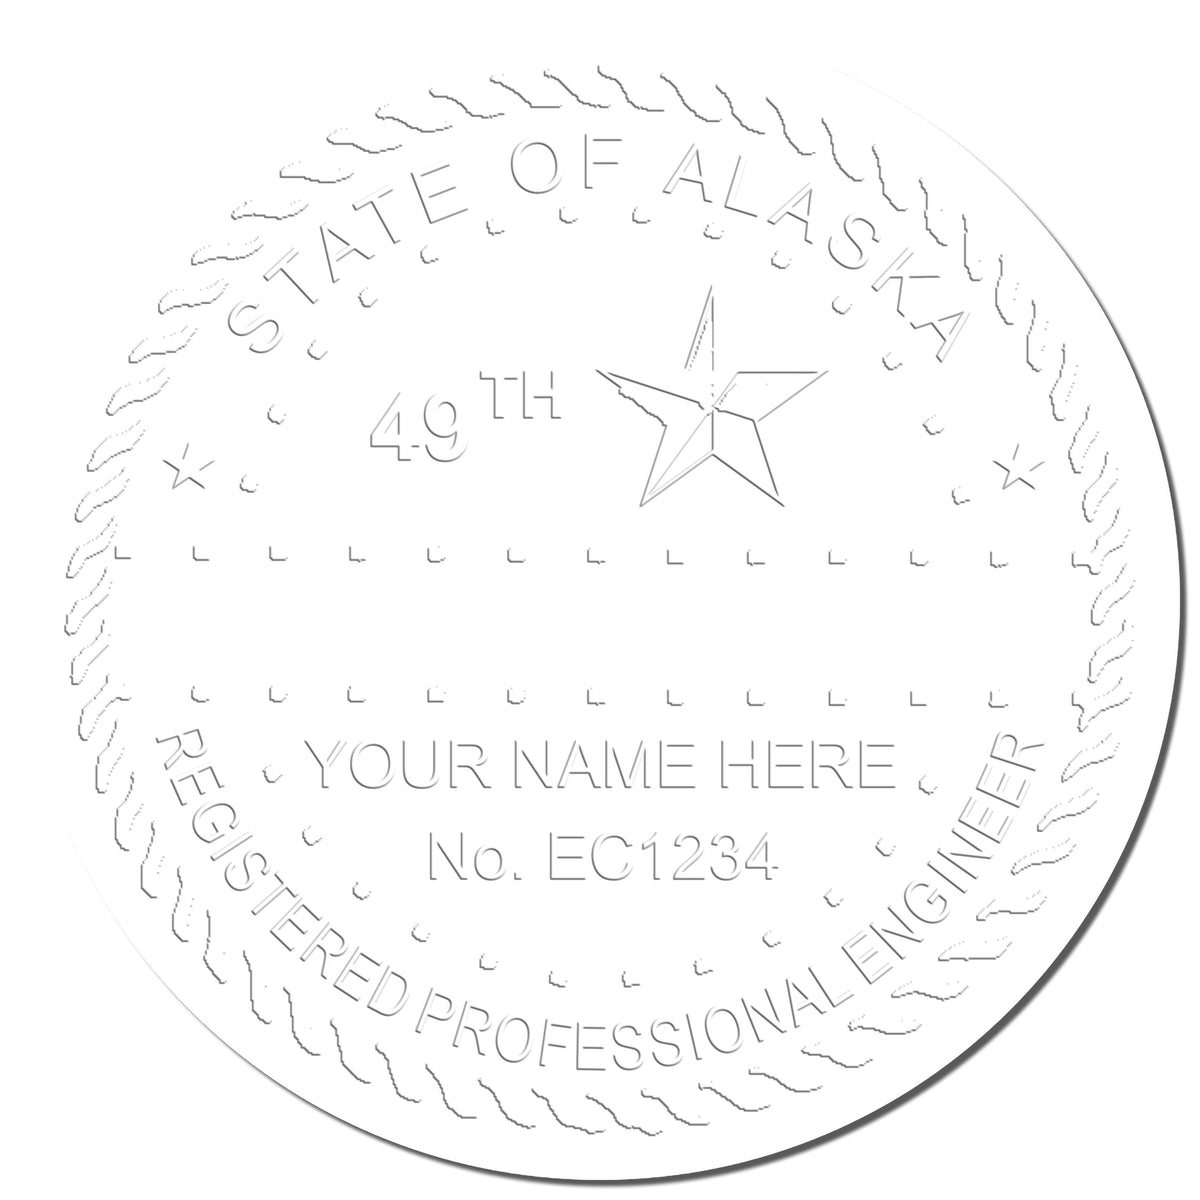 This paper is stamped with a sample imprint of the Gift Alaska Engineer Seal, signifying its quality and reliability.